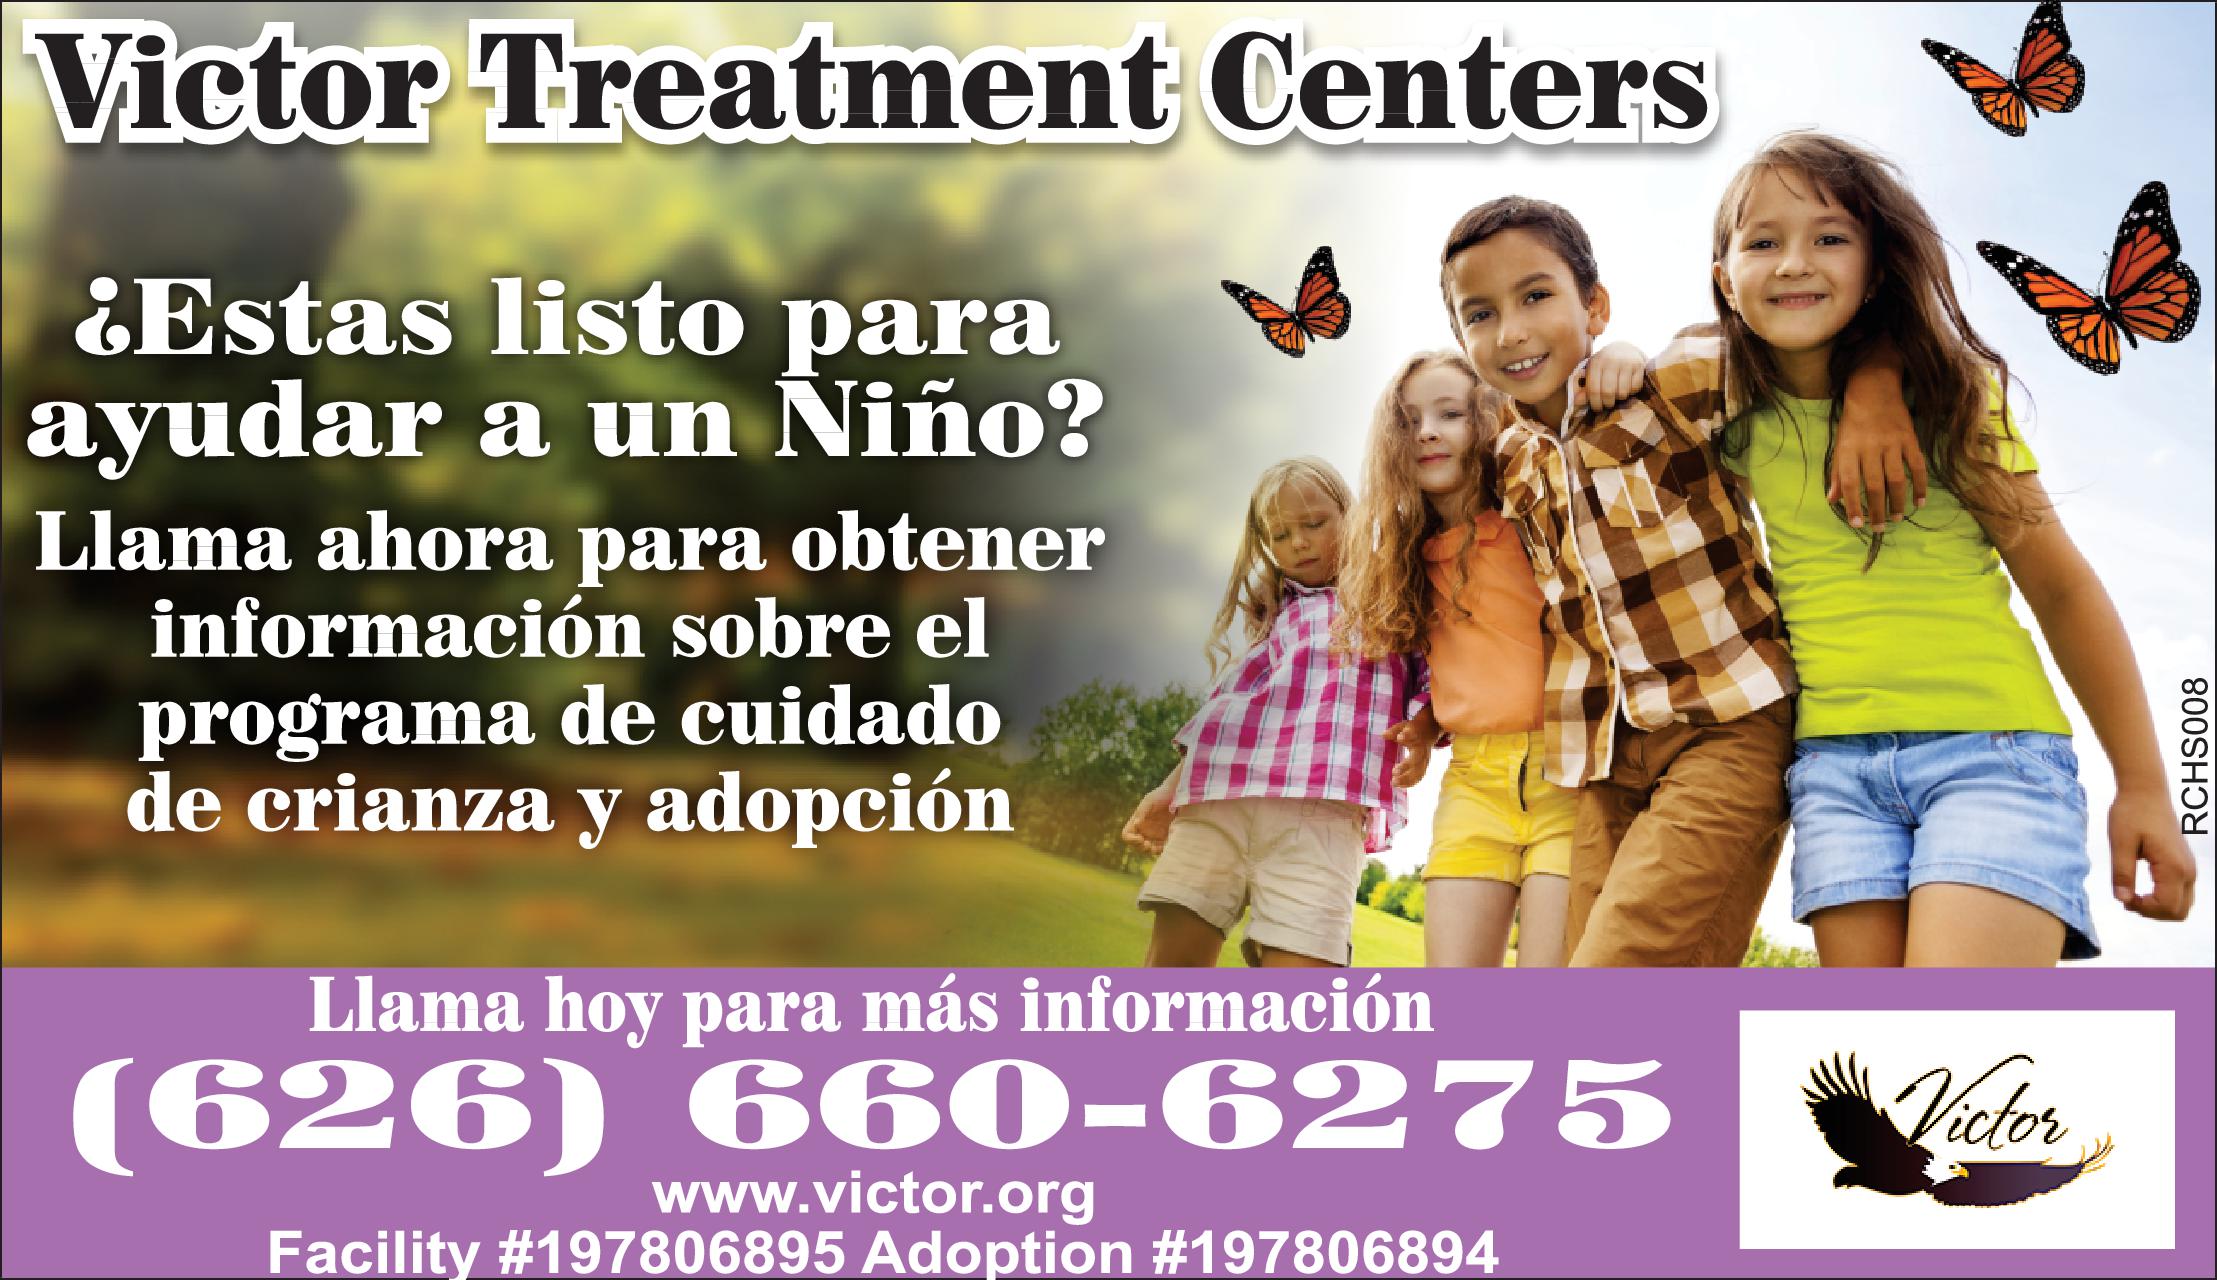 Victor Treatment Centers